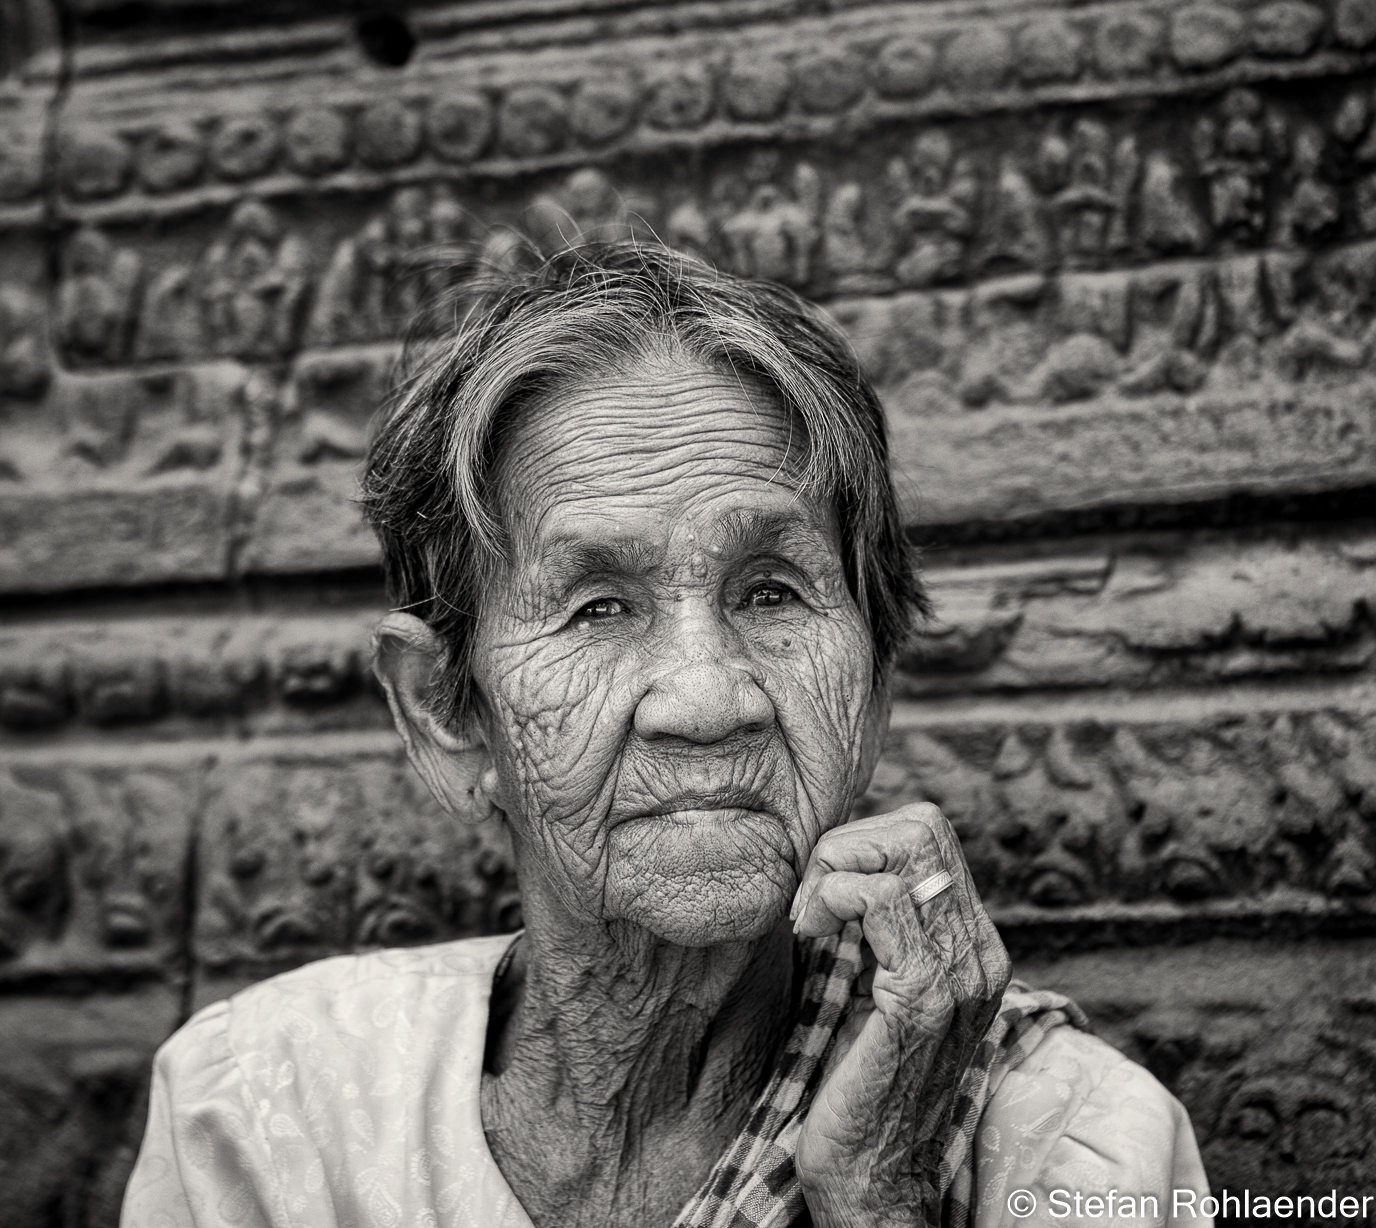 Lady at a temple south of Phnom Penh